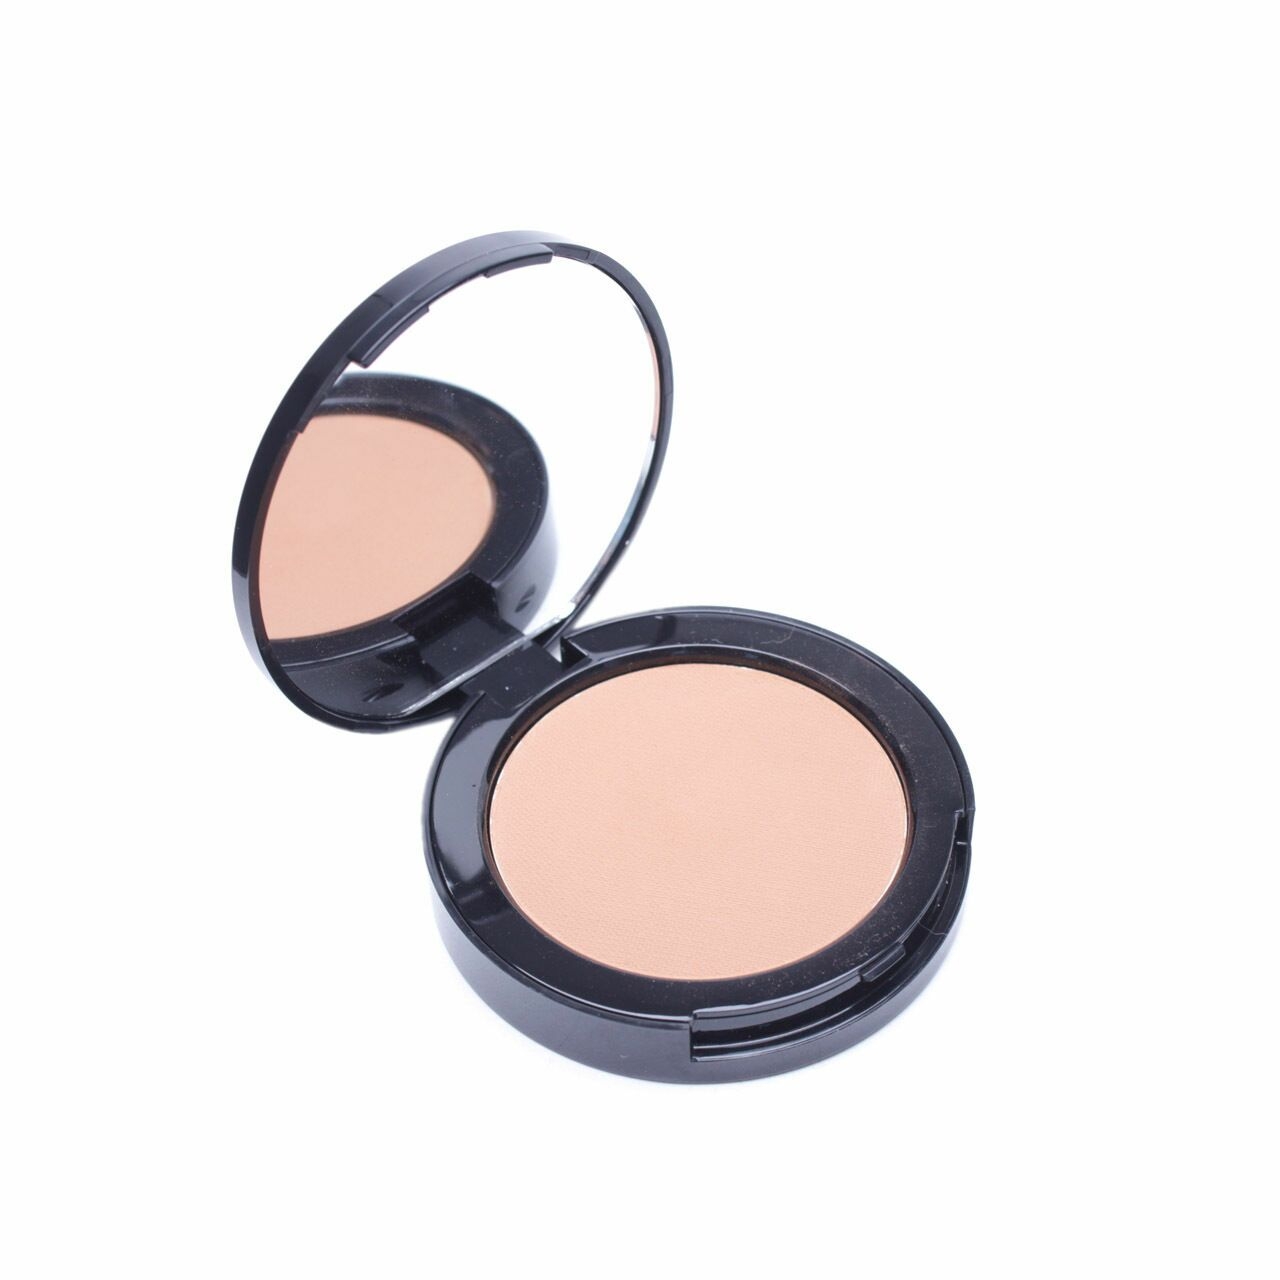 Goban Cocoa Sunkissed Matte Bronzing Powder Faces